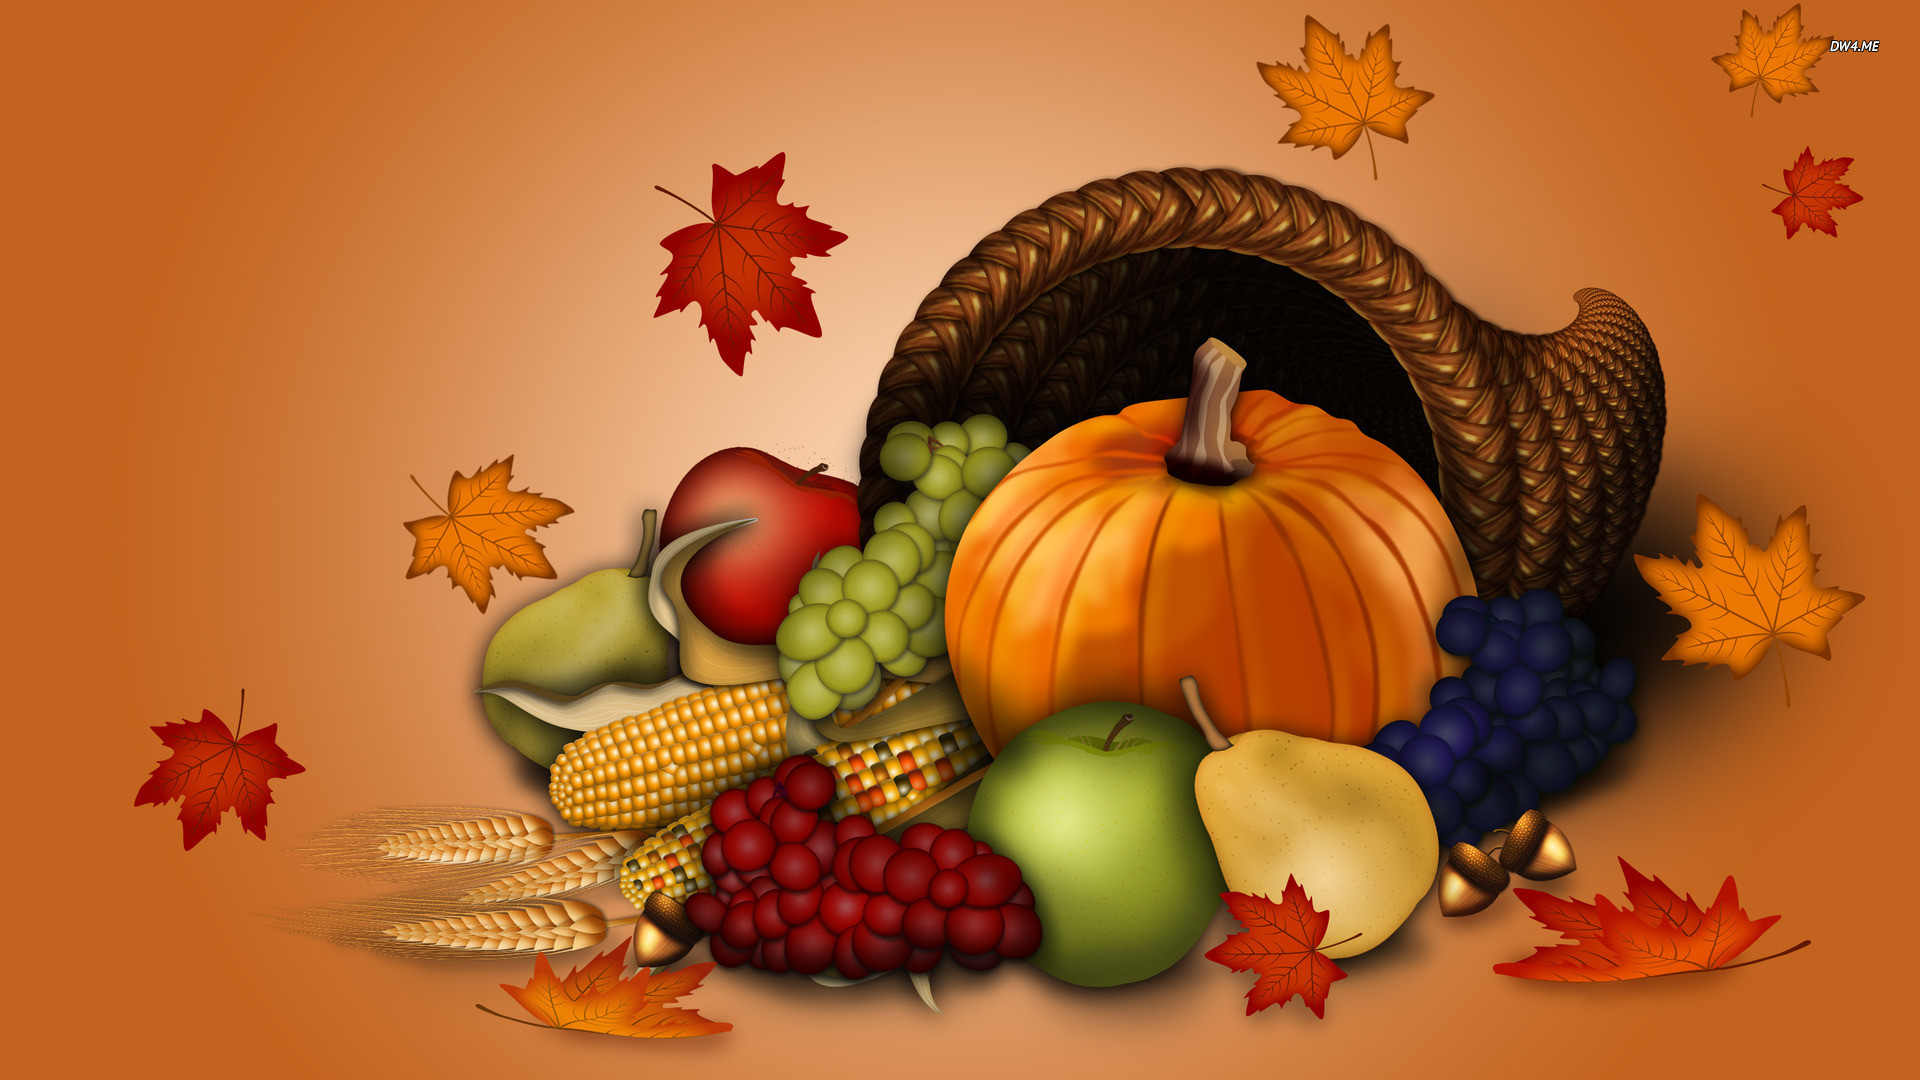 1920x1080 Thanksgiving Backgrounds Thanksgiving Background Images | HD Wallpapers |  Pinterest | Thanksgiving background, 3d wallpaper and Wallpaper